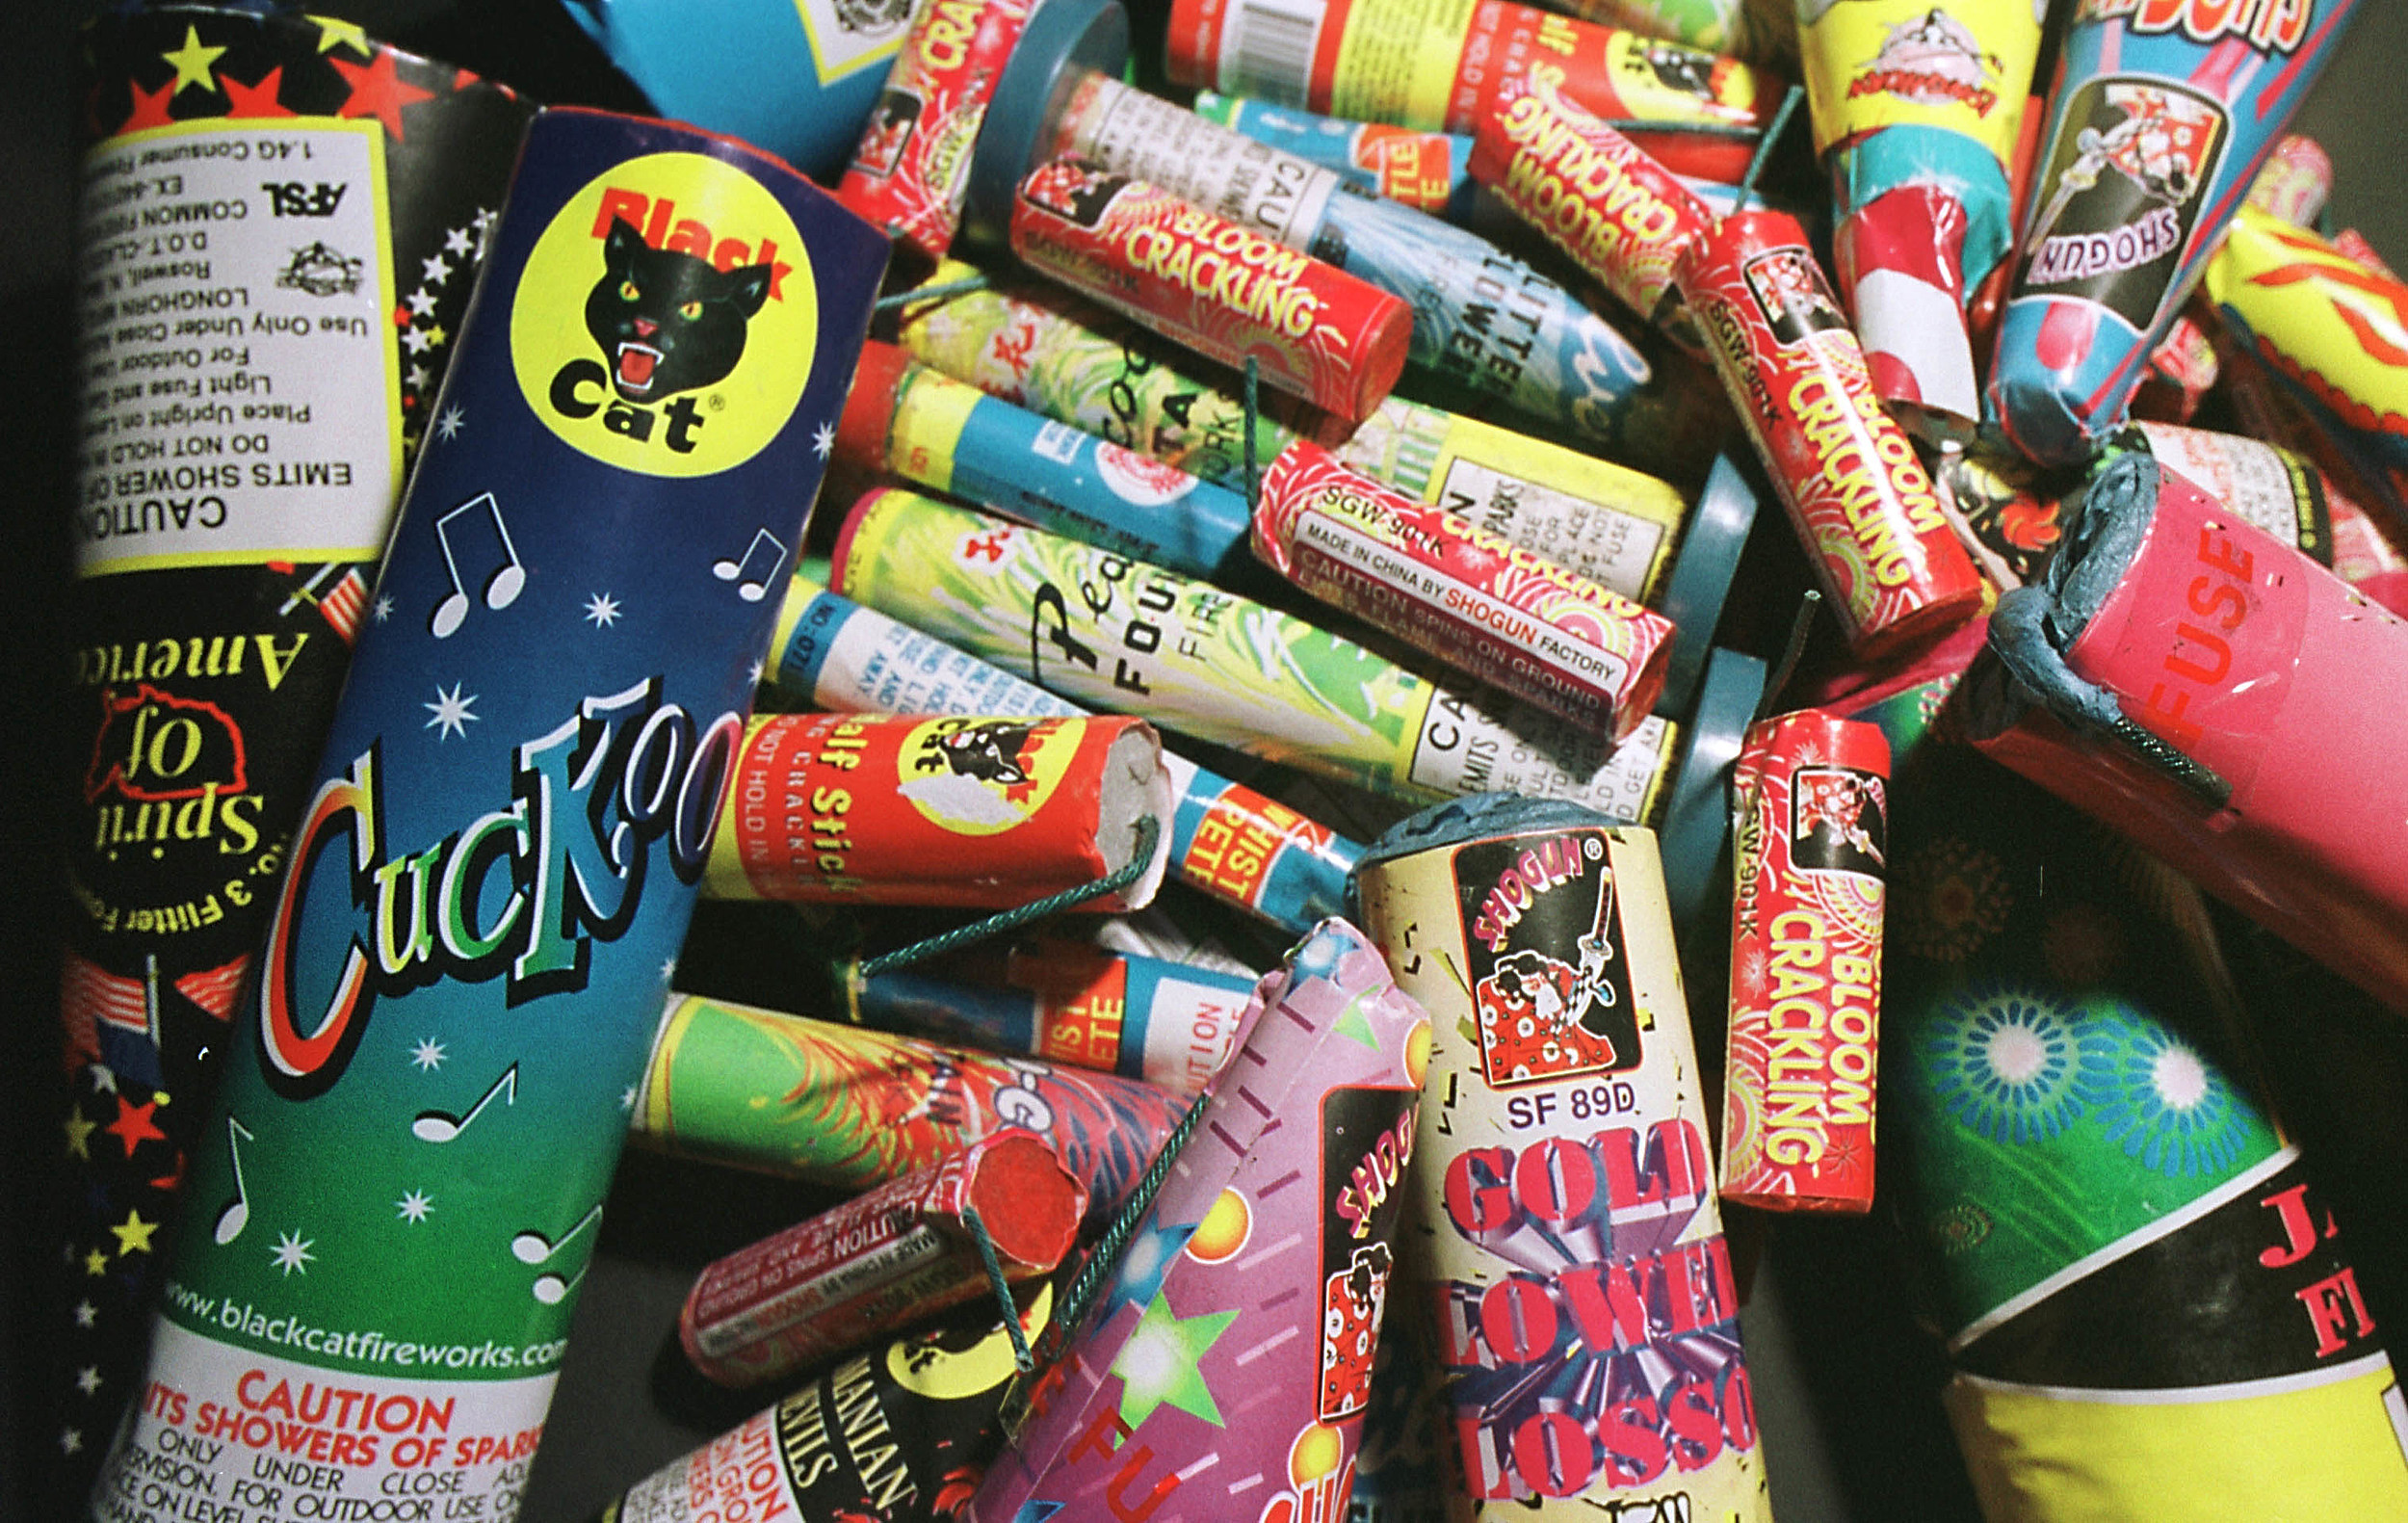 Where Were The Best Fireworks In Genesee County + Mid Michigan? [Poll]